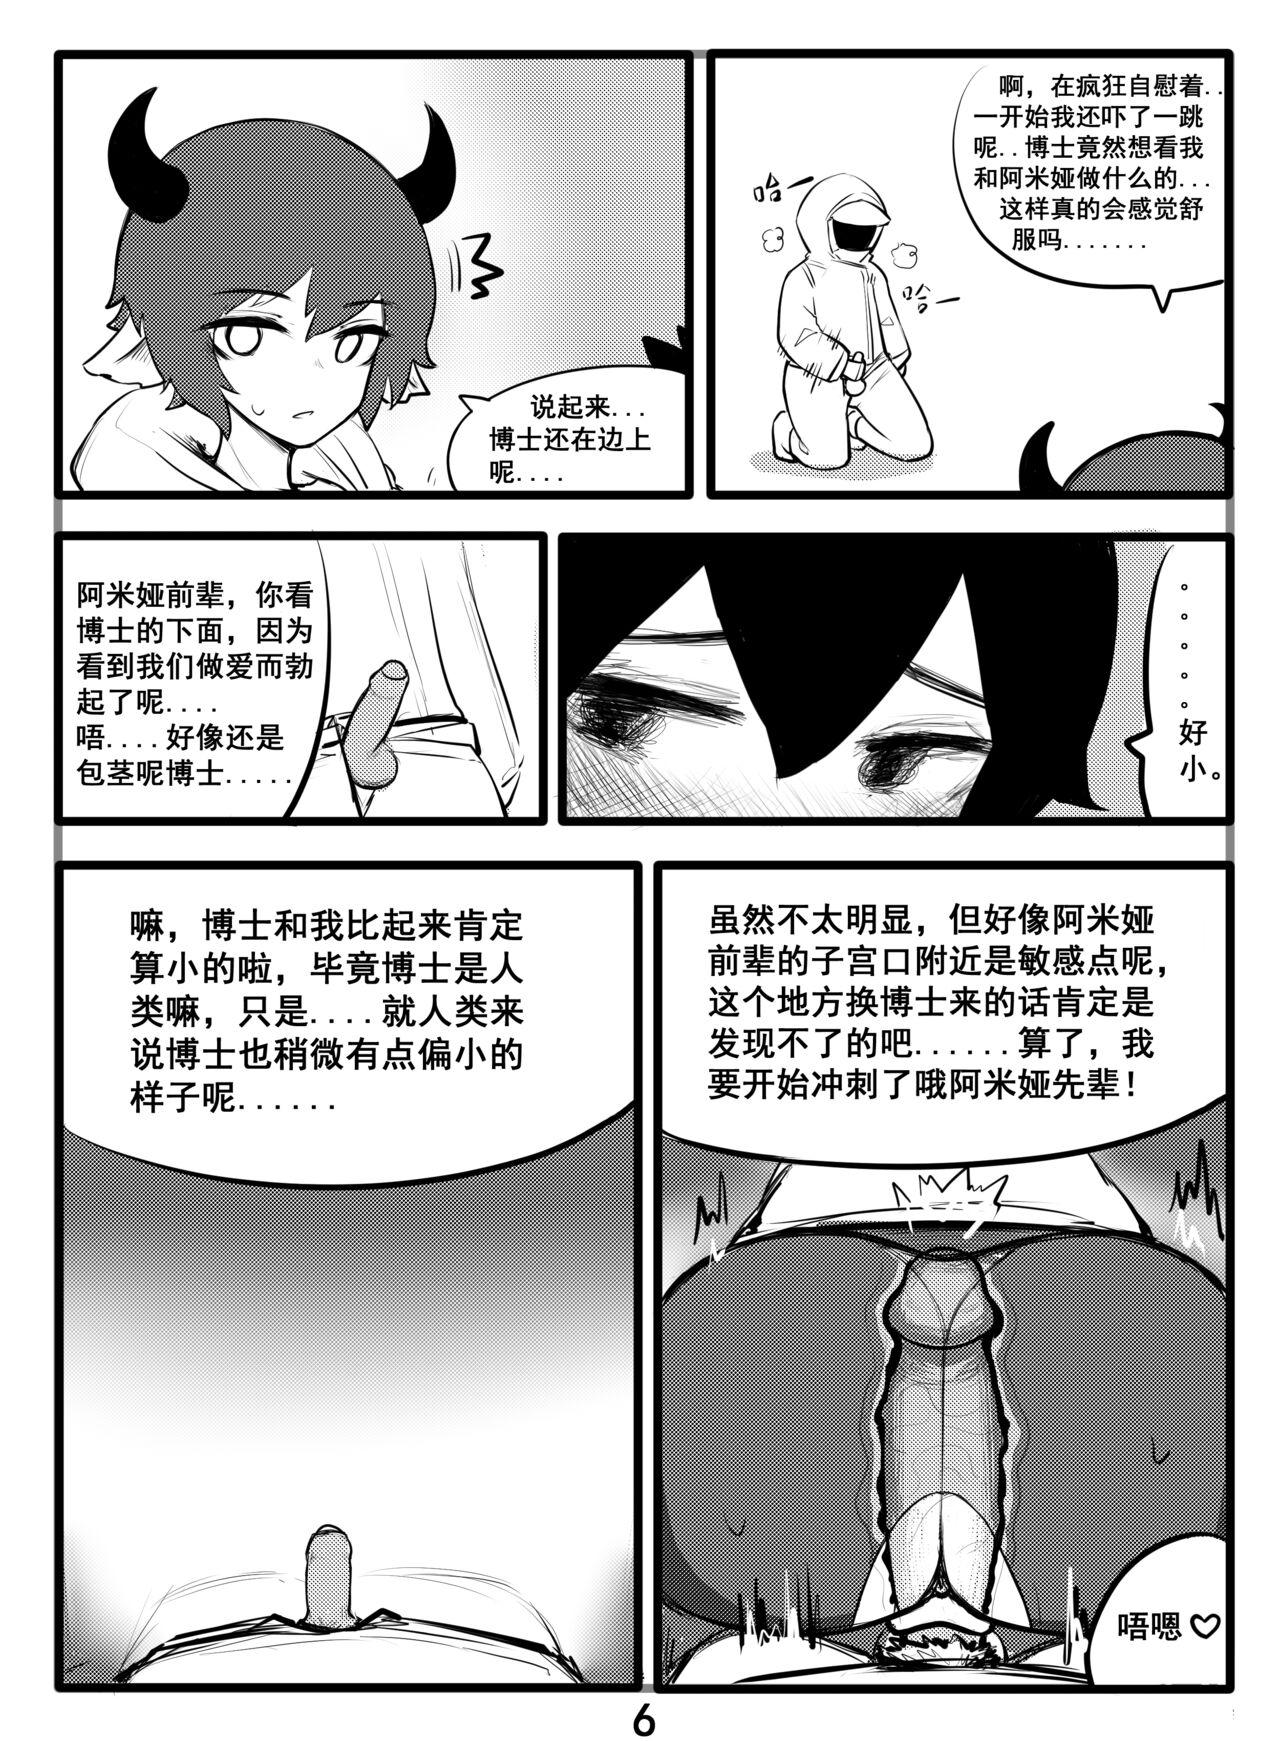 Shemale Sex 搬运杂图 Toying - Page 6